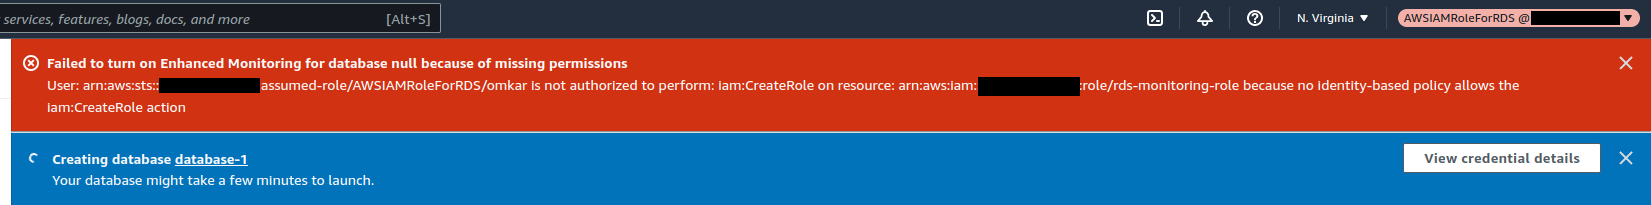 Using an IAM role to create resources